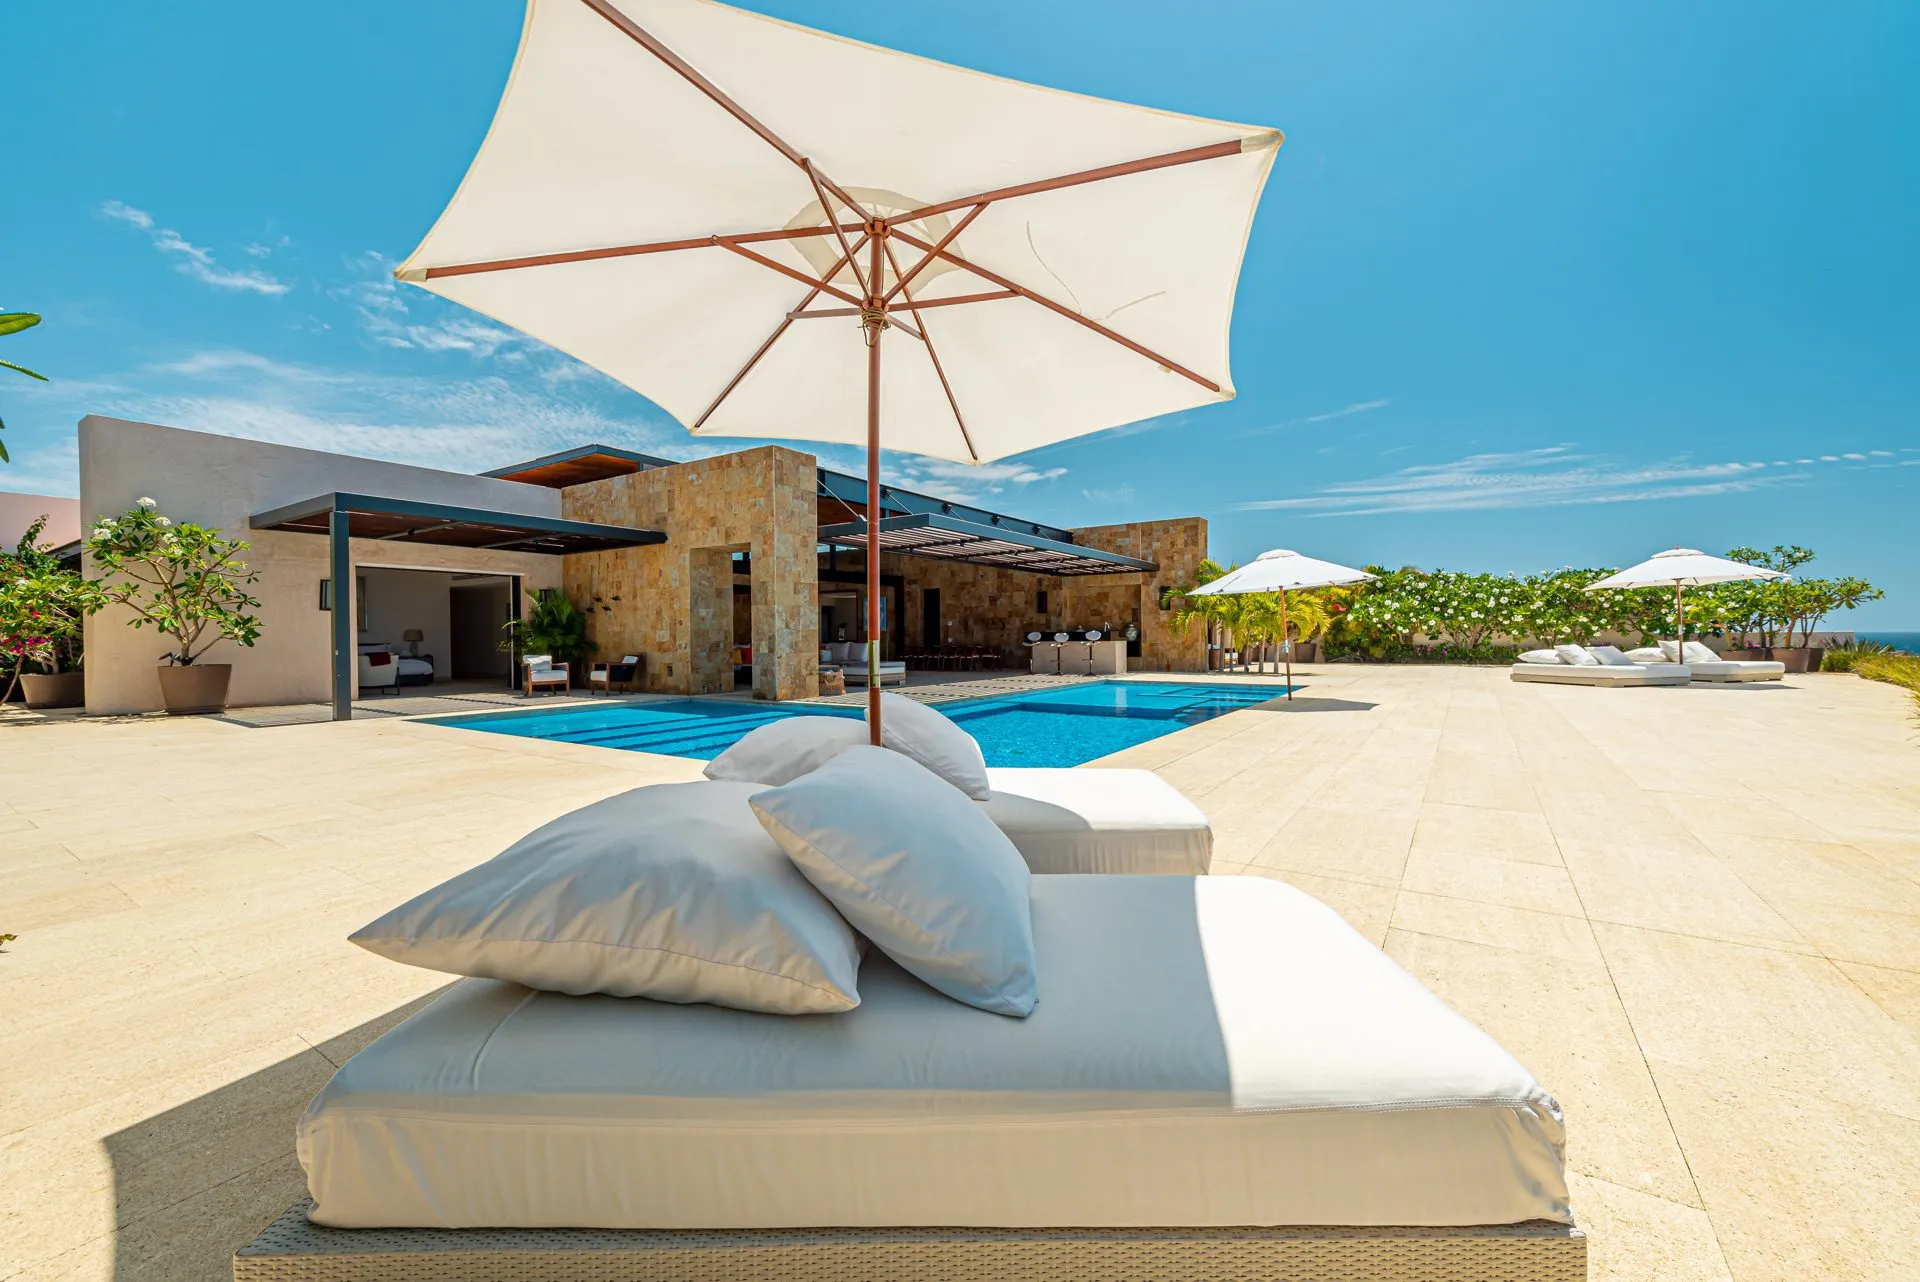 West Enclave 10 is a Ritz-Carlton Reserve branded oceanview residence located in San Jose del Cabo. One of the only twenty-seven villas, this residence was launched for the first time in fall 2021 to the open market as available for purchase.